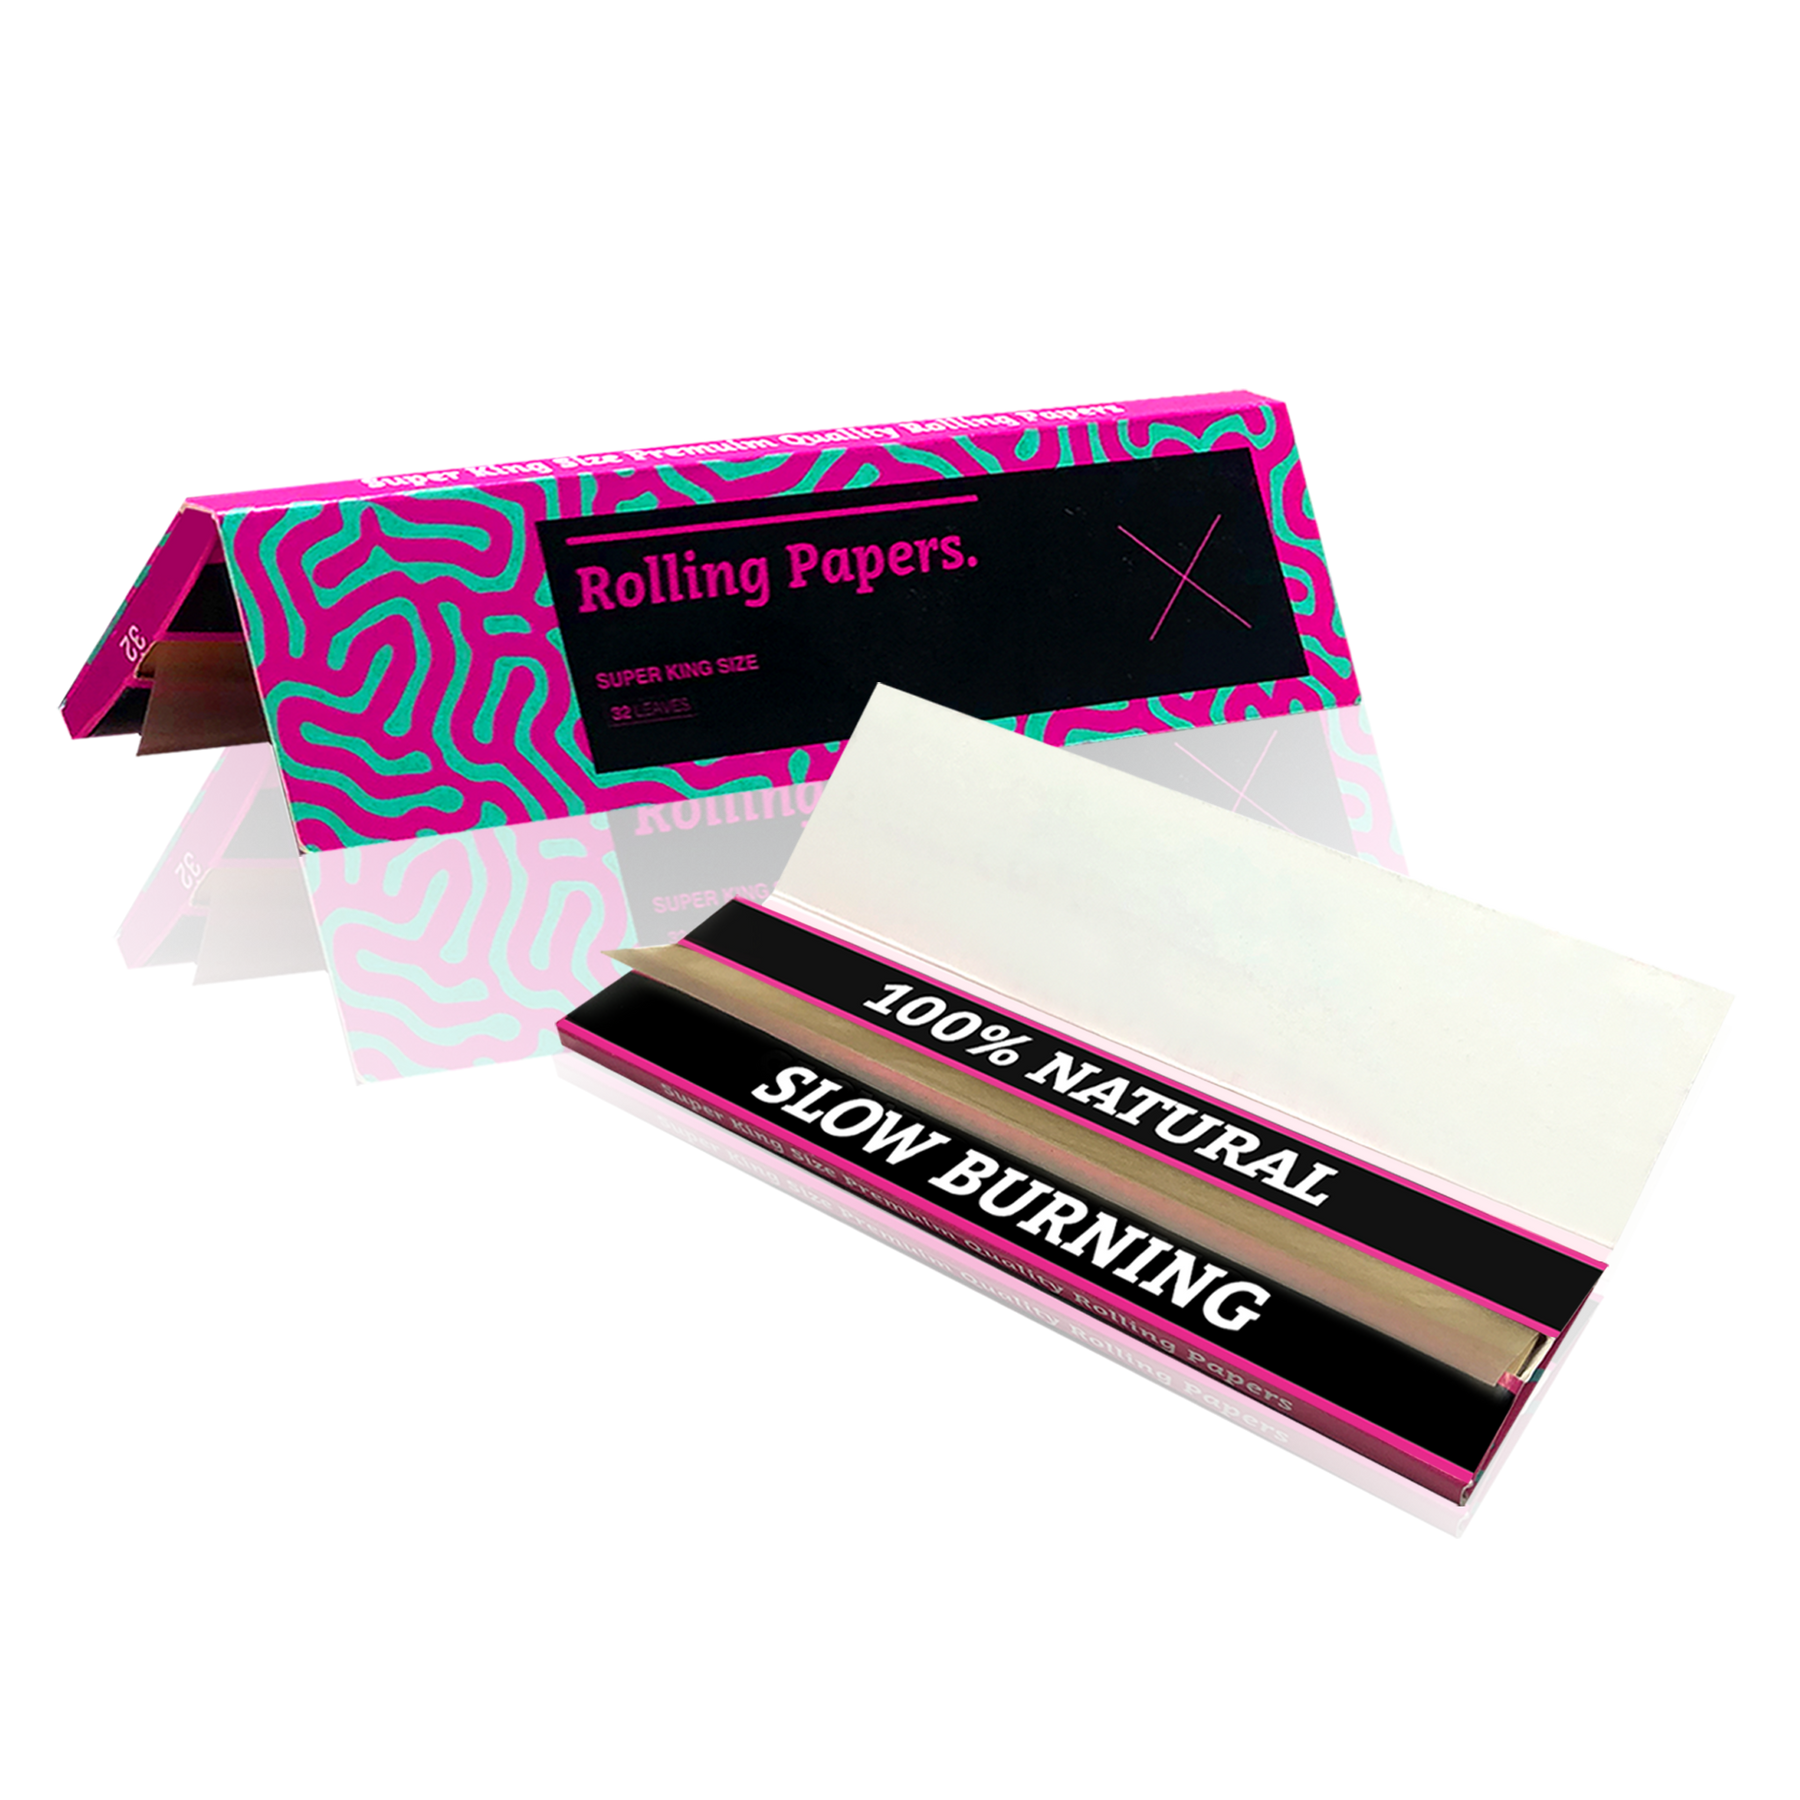 Download Custom Printed Booklets In Super King Size Roll Your Own Papers Com